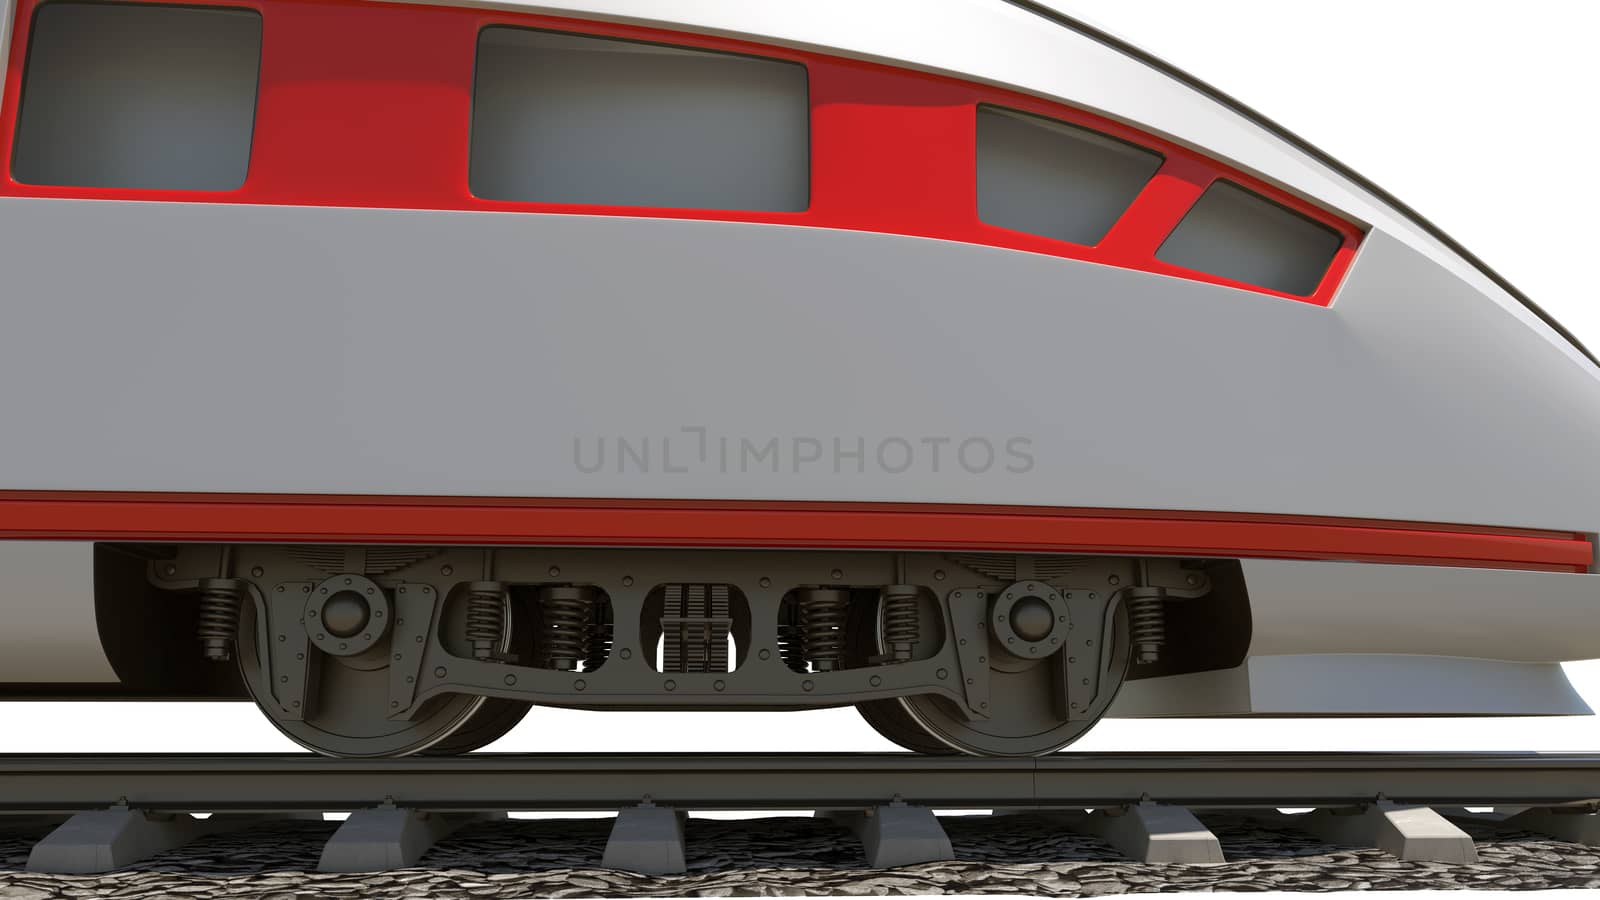 Long train with stripes on isolated white background, close-up view